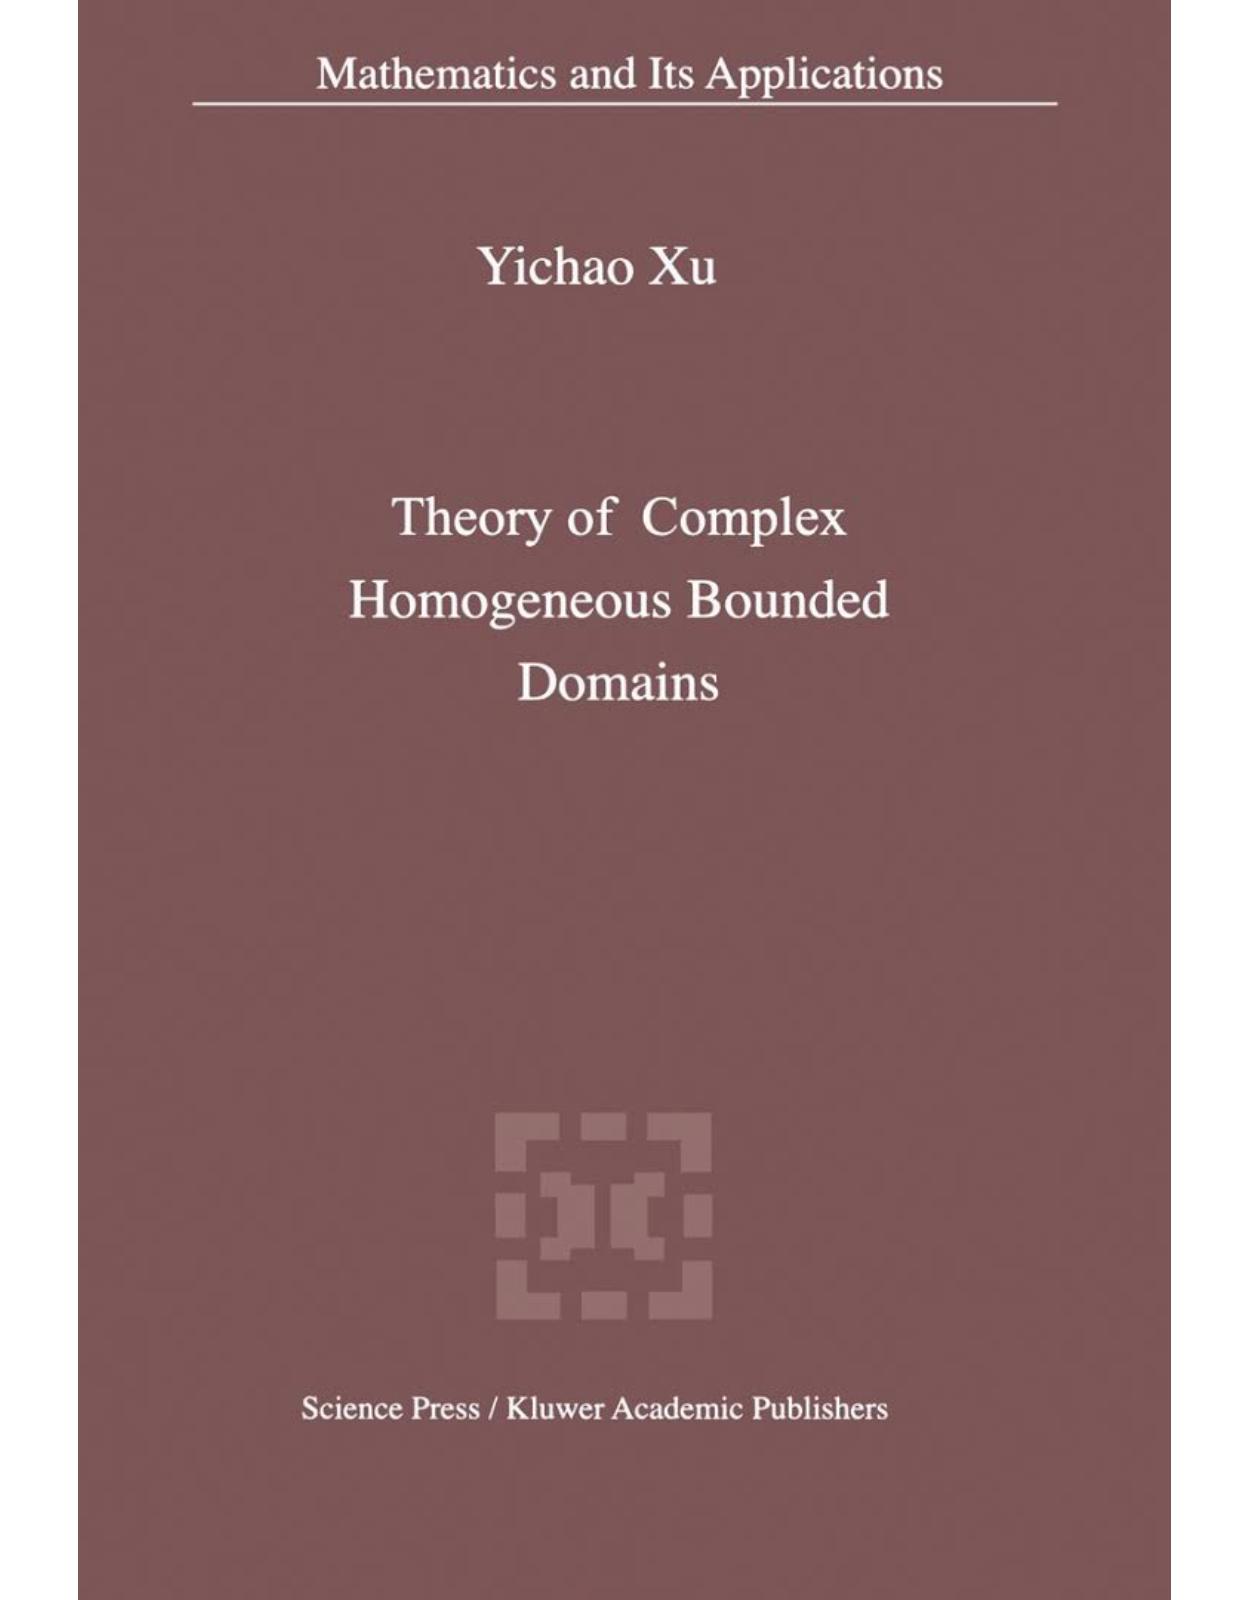 Theory of complex homogeneous bounded domains